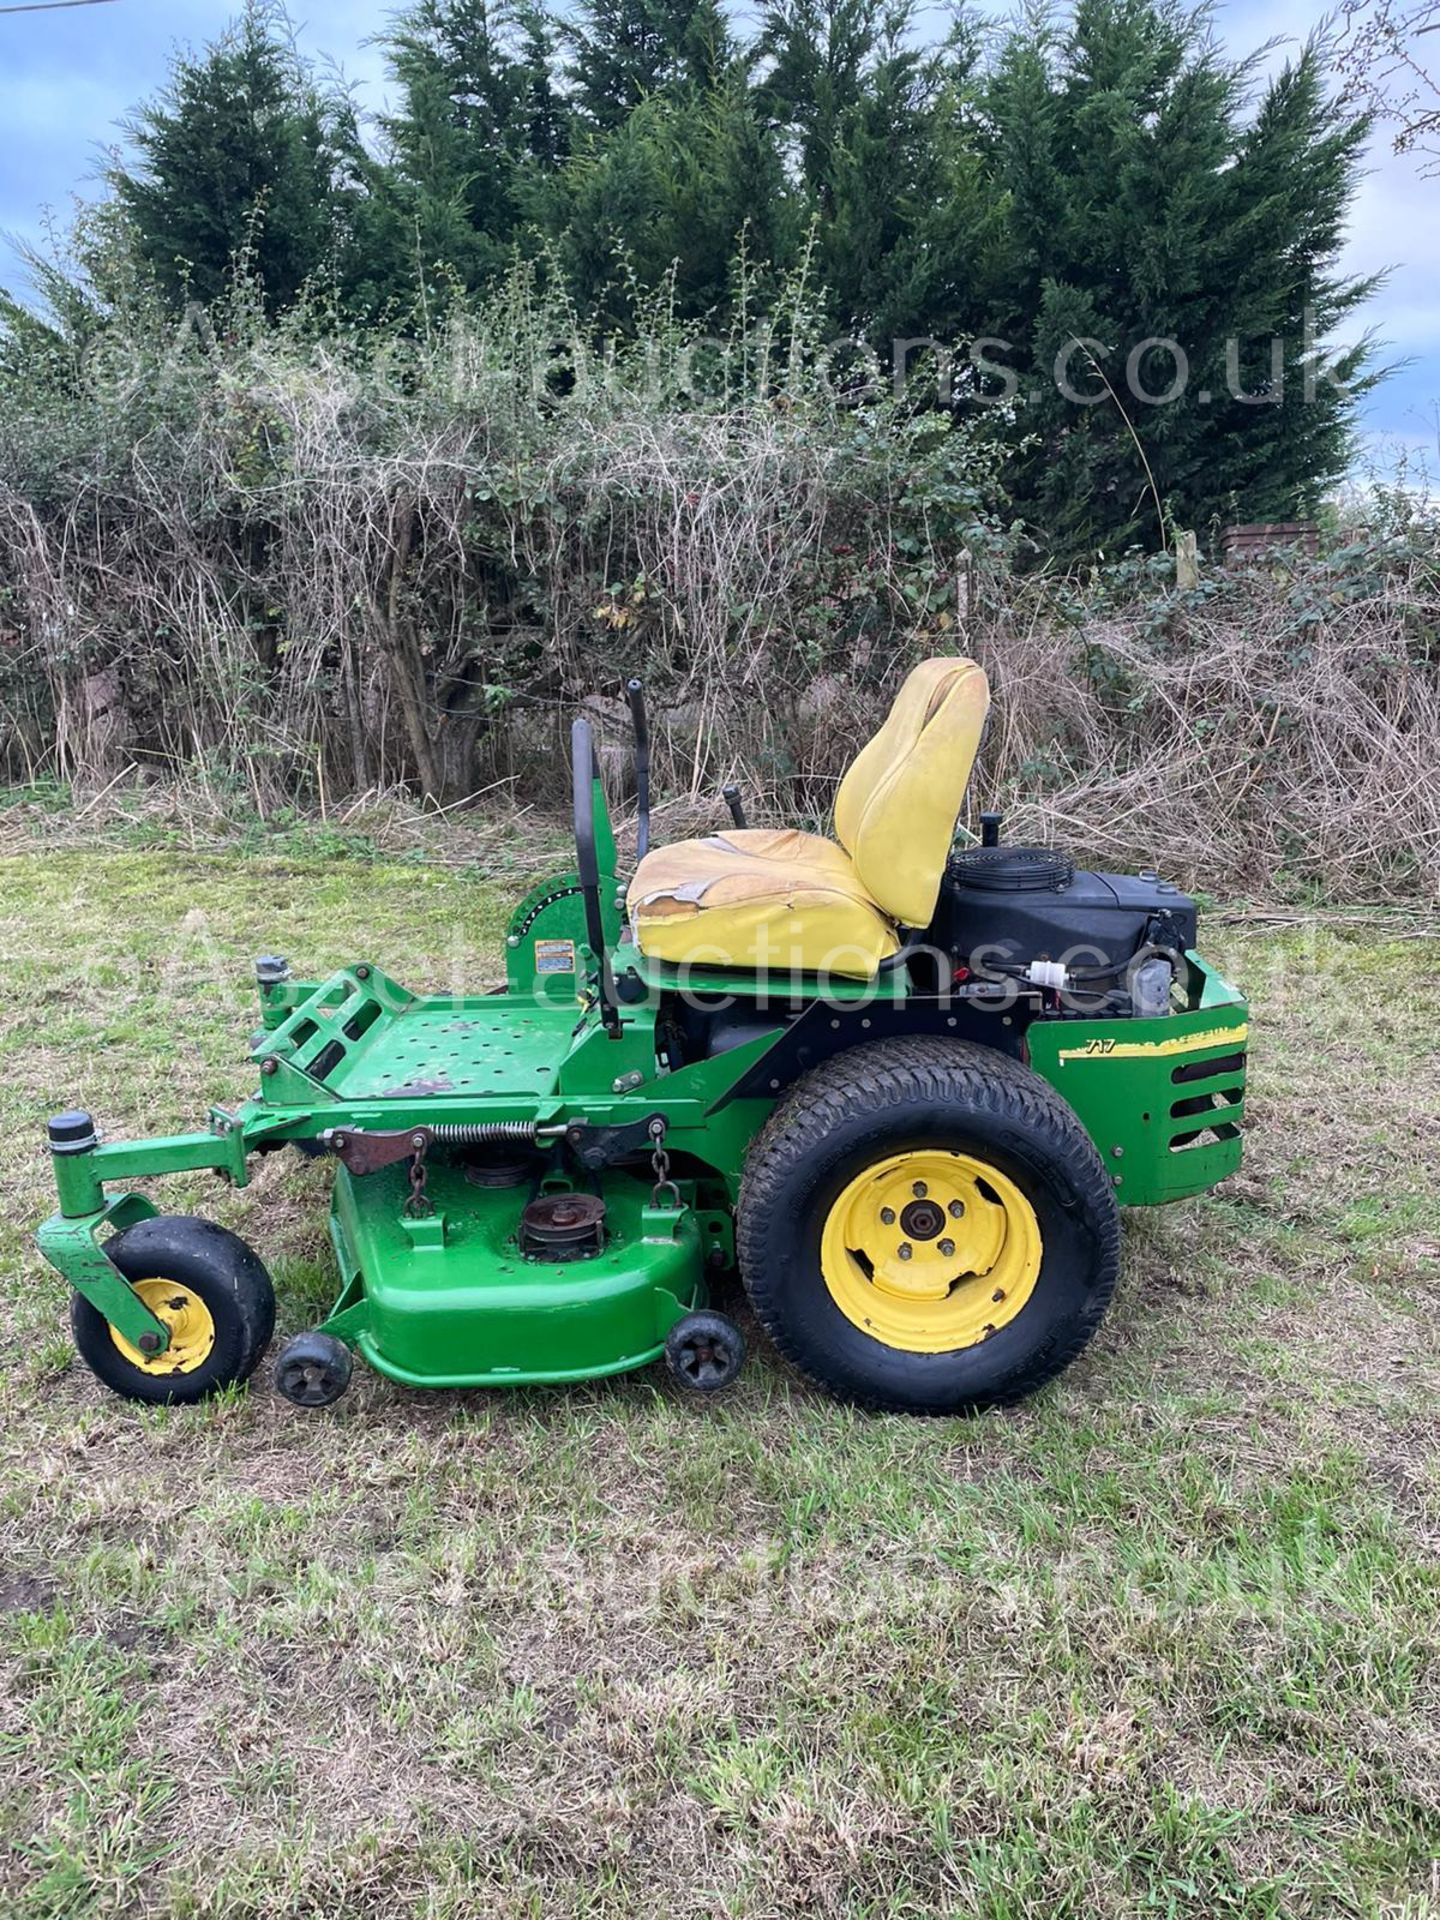 JOHN DEERE 717 Z-TRAK ZERO TURN RIDE ON LAWN MOWER, RUNS DRIVES AND CUTS, SHOWING A LOW 336 HOURS - Image 9 of 18